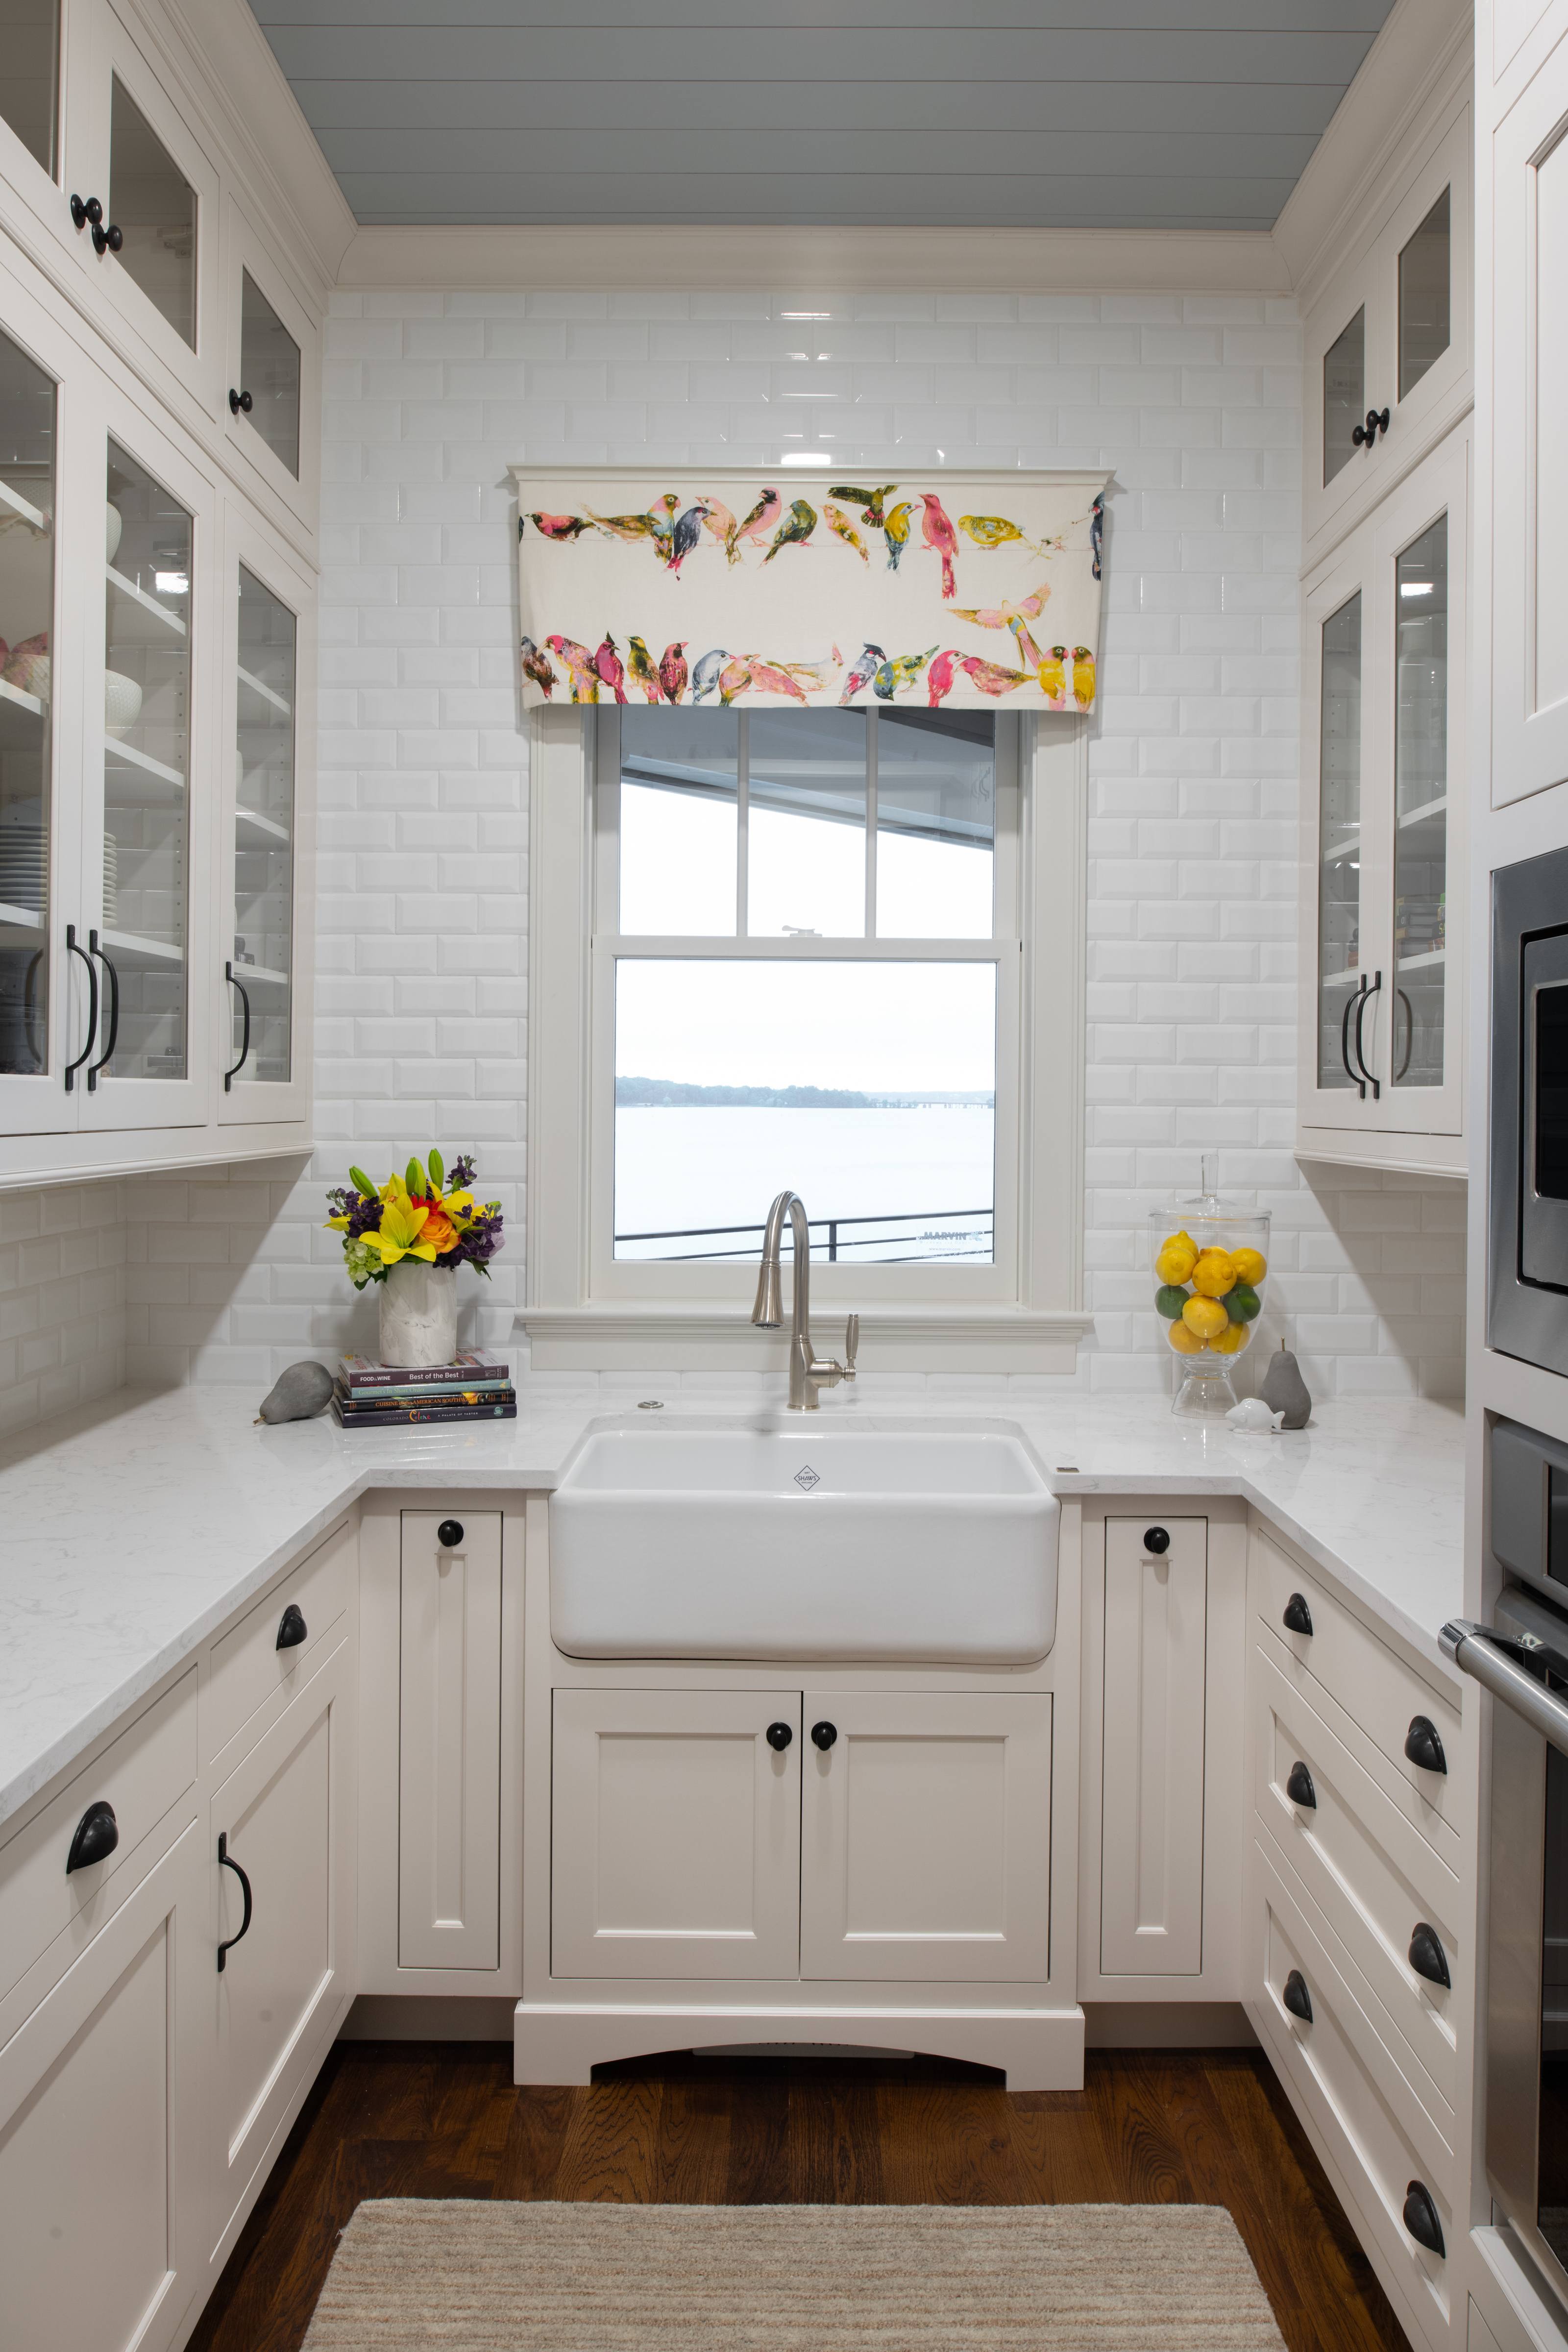 Scullery or Small Kitchen Design by Mingle with Cambria Countertops